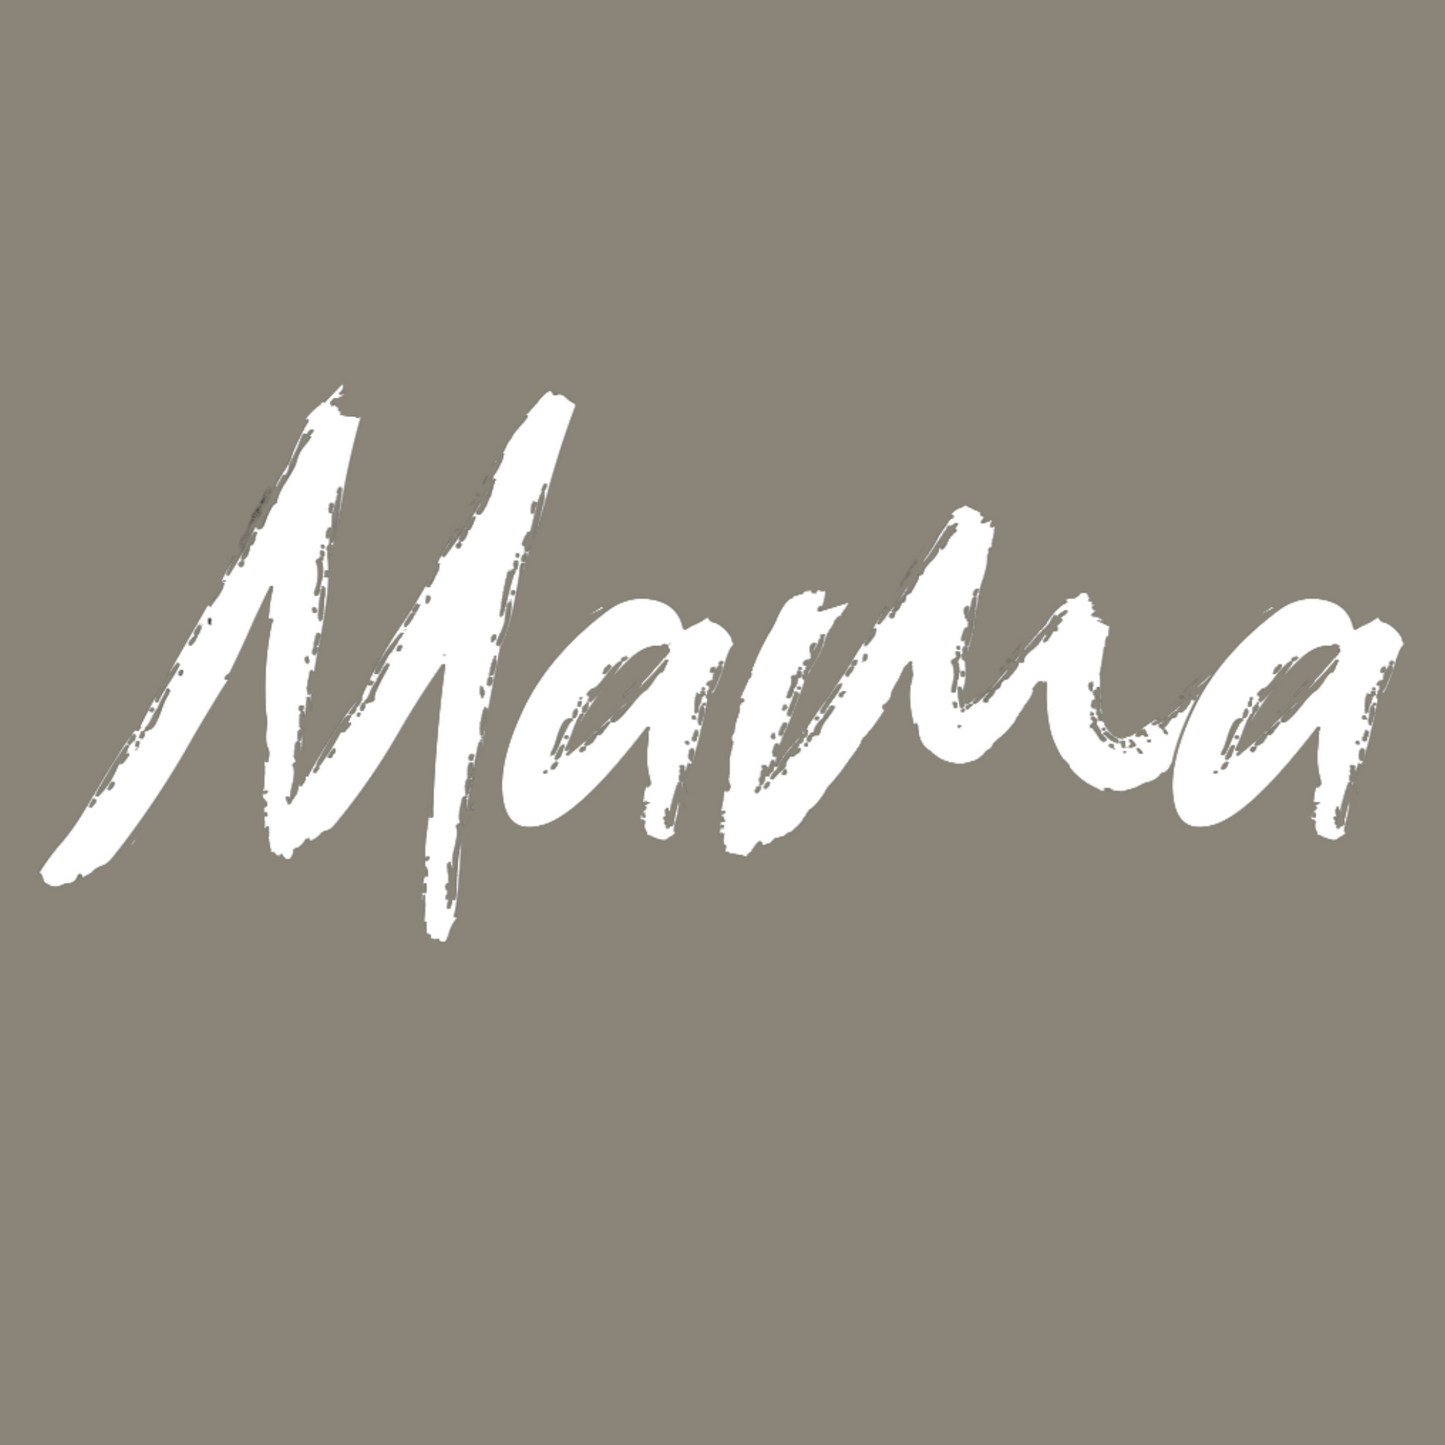 Green Mama - Pull Over Sweatshirt - front viewMama - Pull Over Sweatshirt in olive green with a white cursive modern font design with "mama" on it. This is an up close view of the mama design on an olive green background.